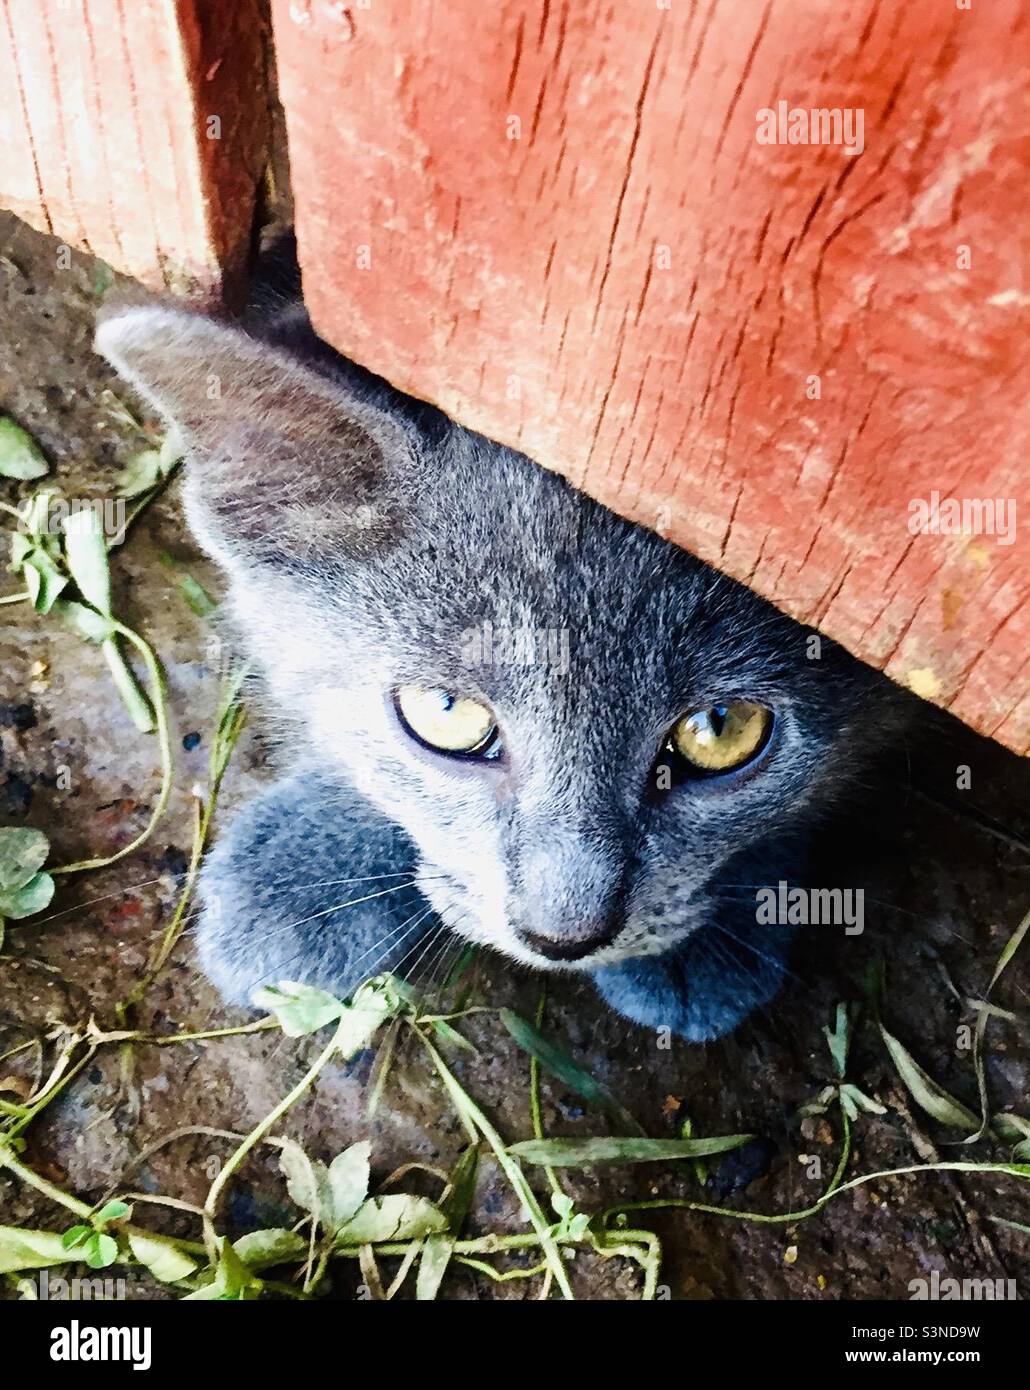 Adorable, shy gray kitten peeks out from under a red fence, hiding place, animal rescue Stock Photo